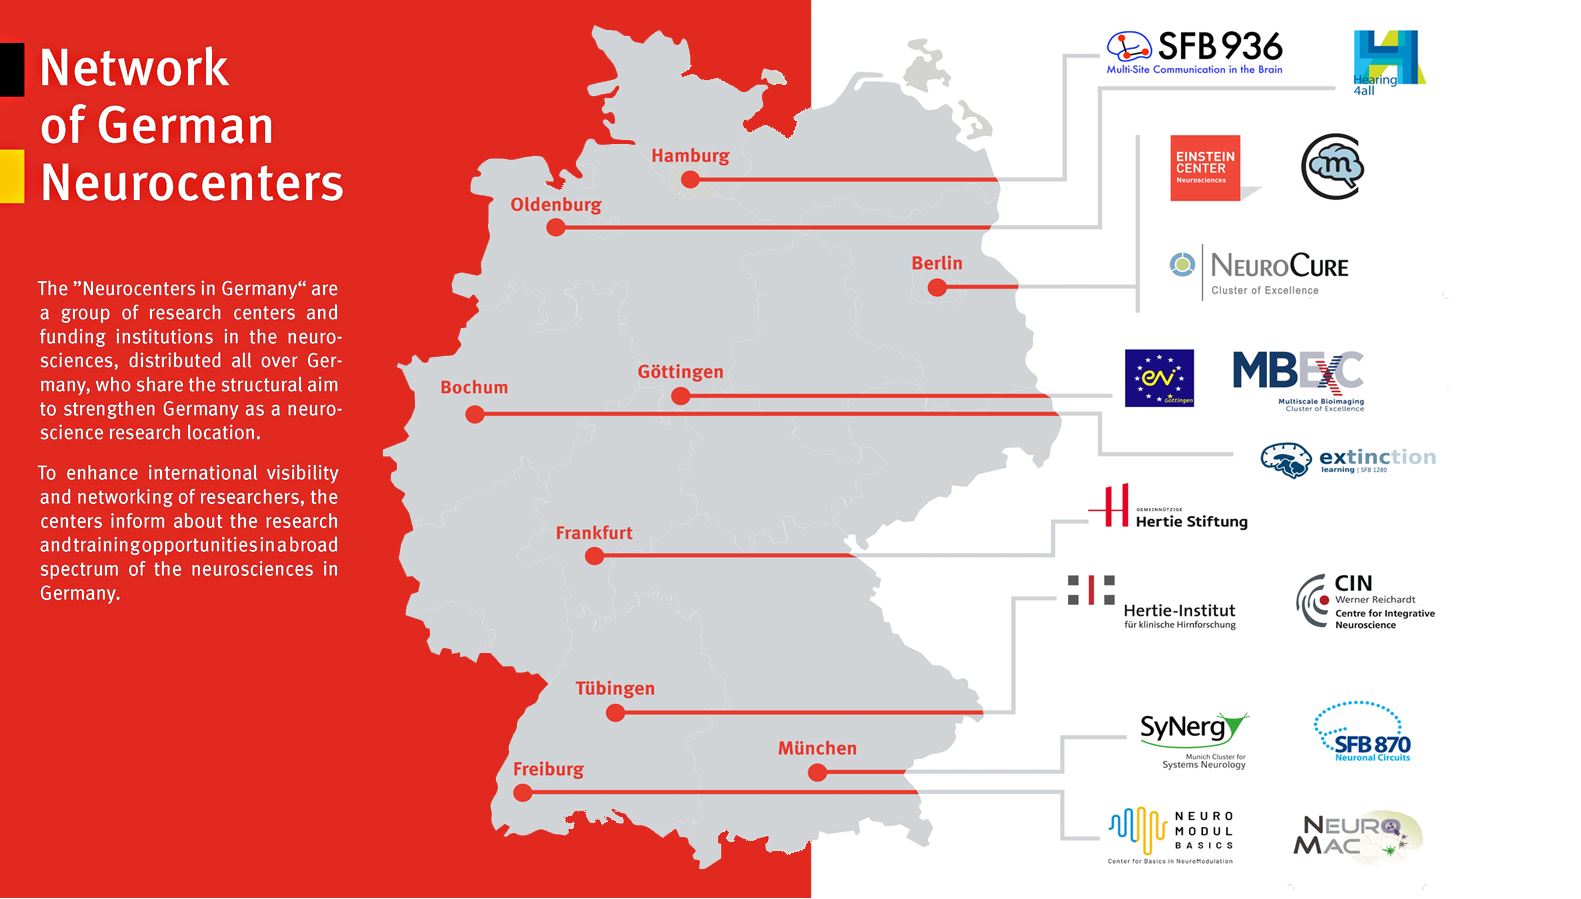 SFB1315 and the Network of German Neurocenters